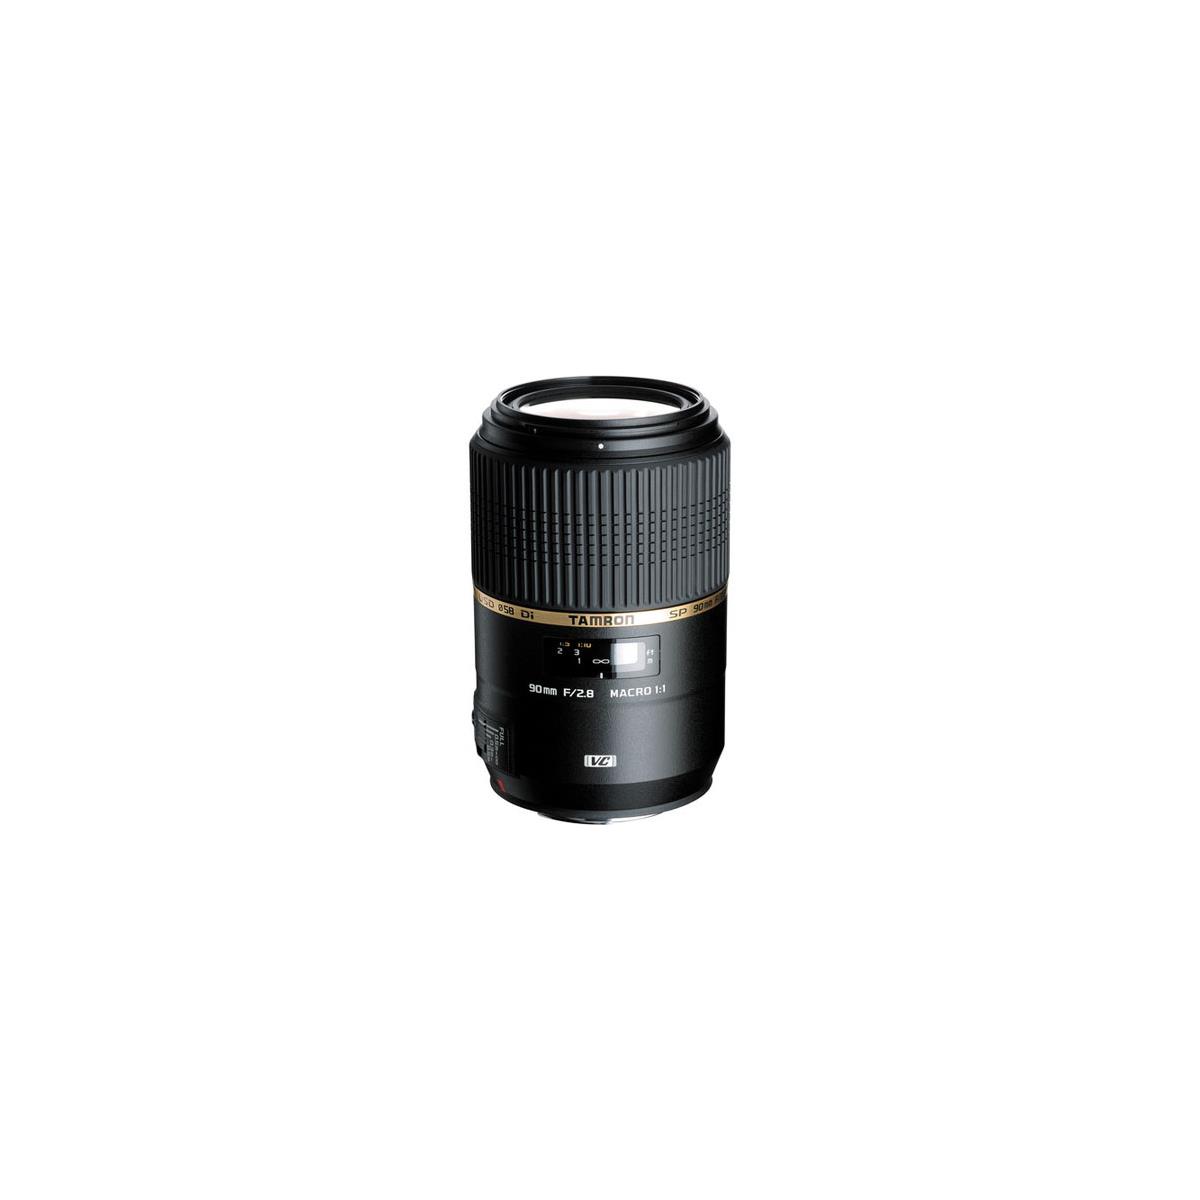 Tamron SP 90mm f/2.8 Di VC USD 1:1 AF Macro for Canon EOS -  AFF004C-700